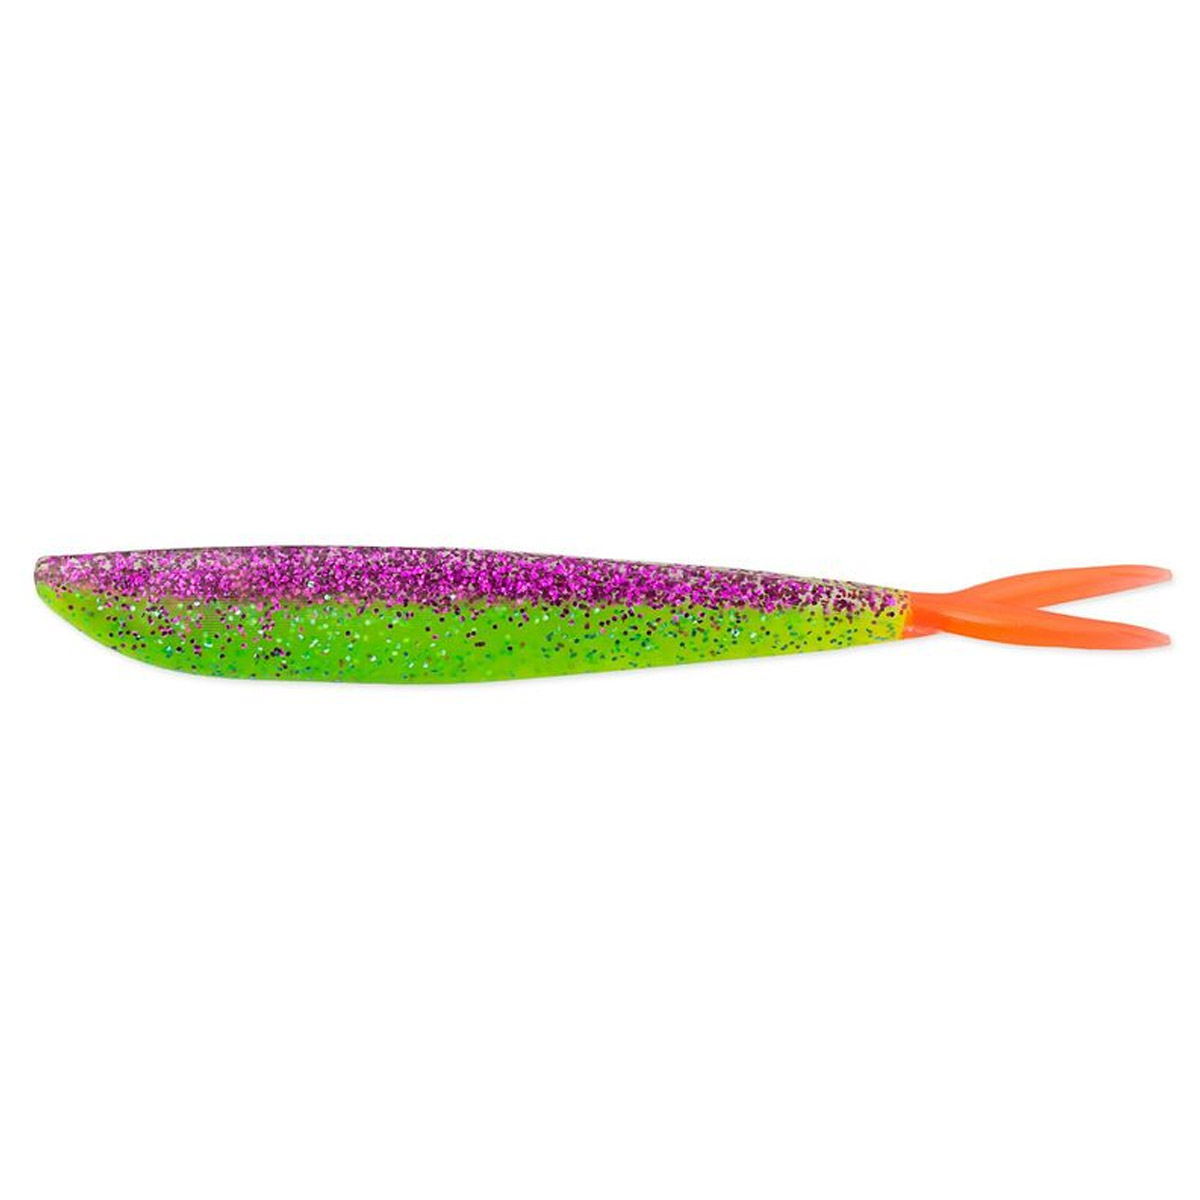 Lunker City Fin-S Fish 4 Inch Tail Colors  -  Pimp Daddy FT